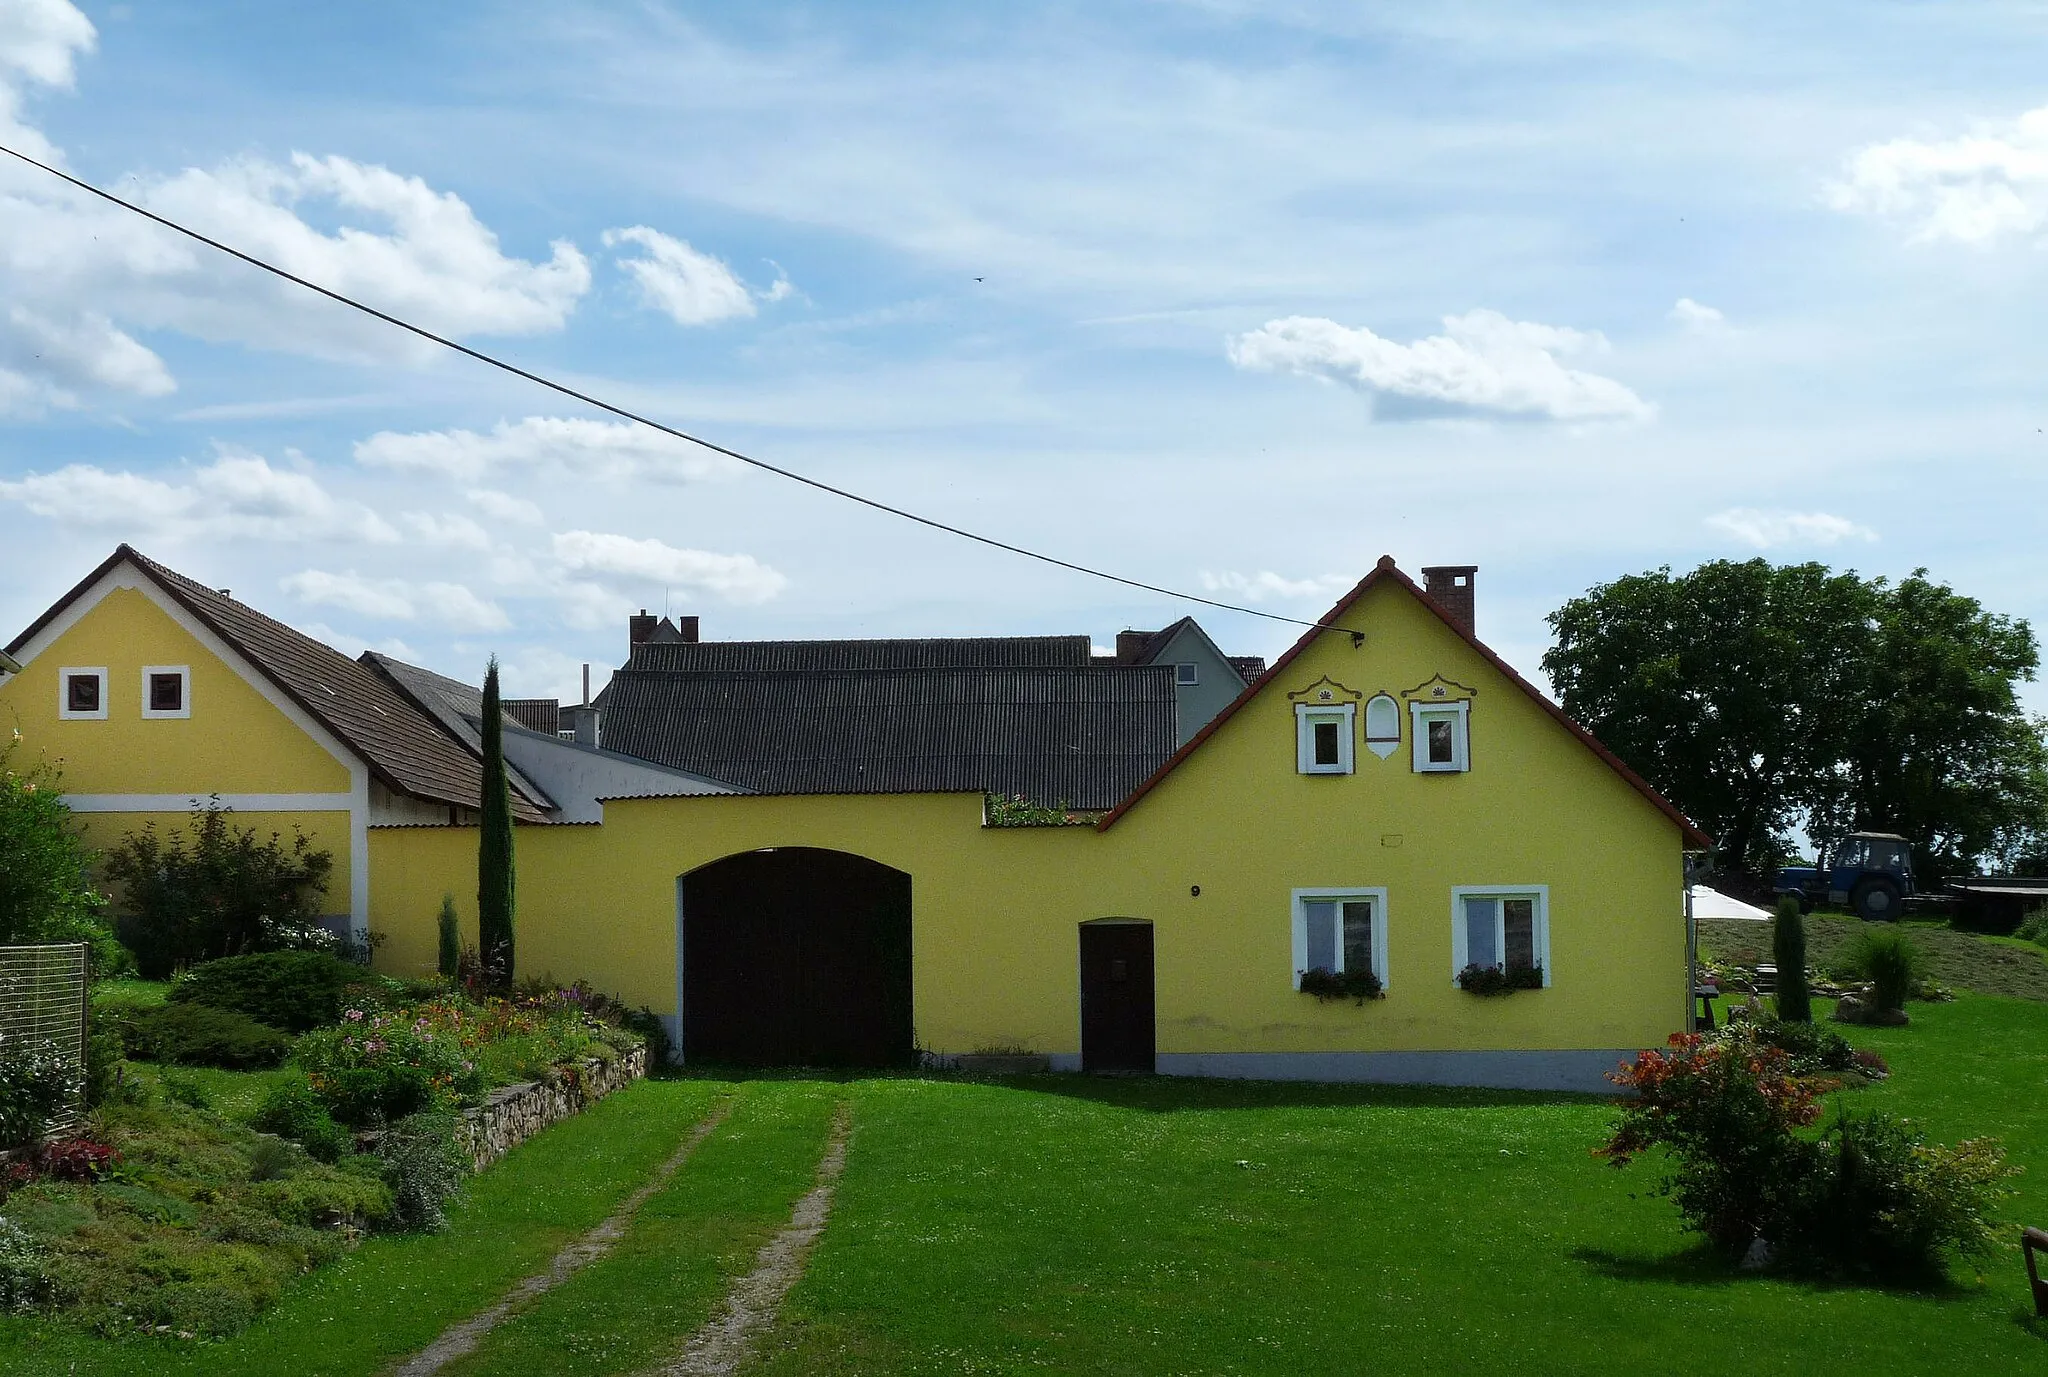 Photo showing: House No 9 in the village of Krtov, Tábor District, Czech Republic.